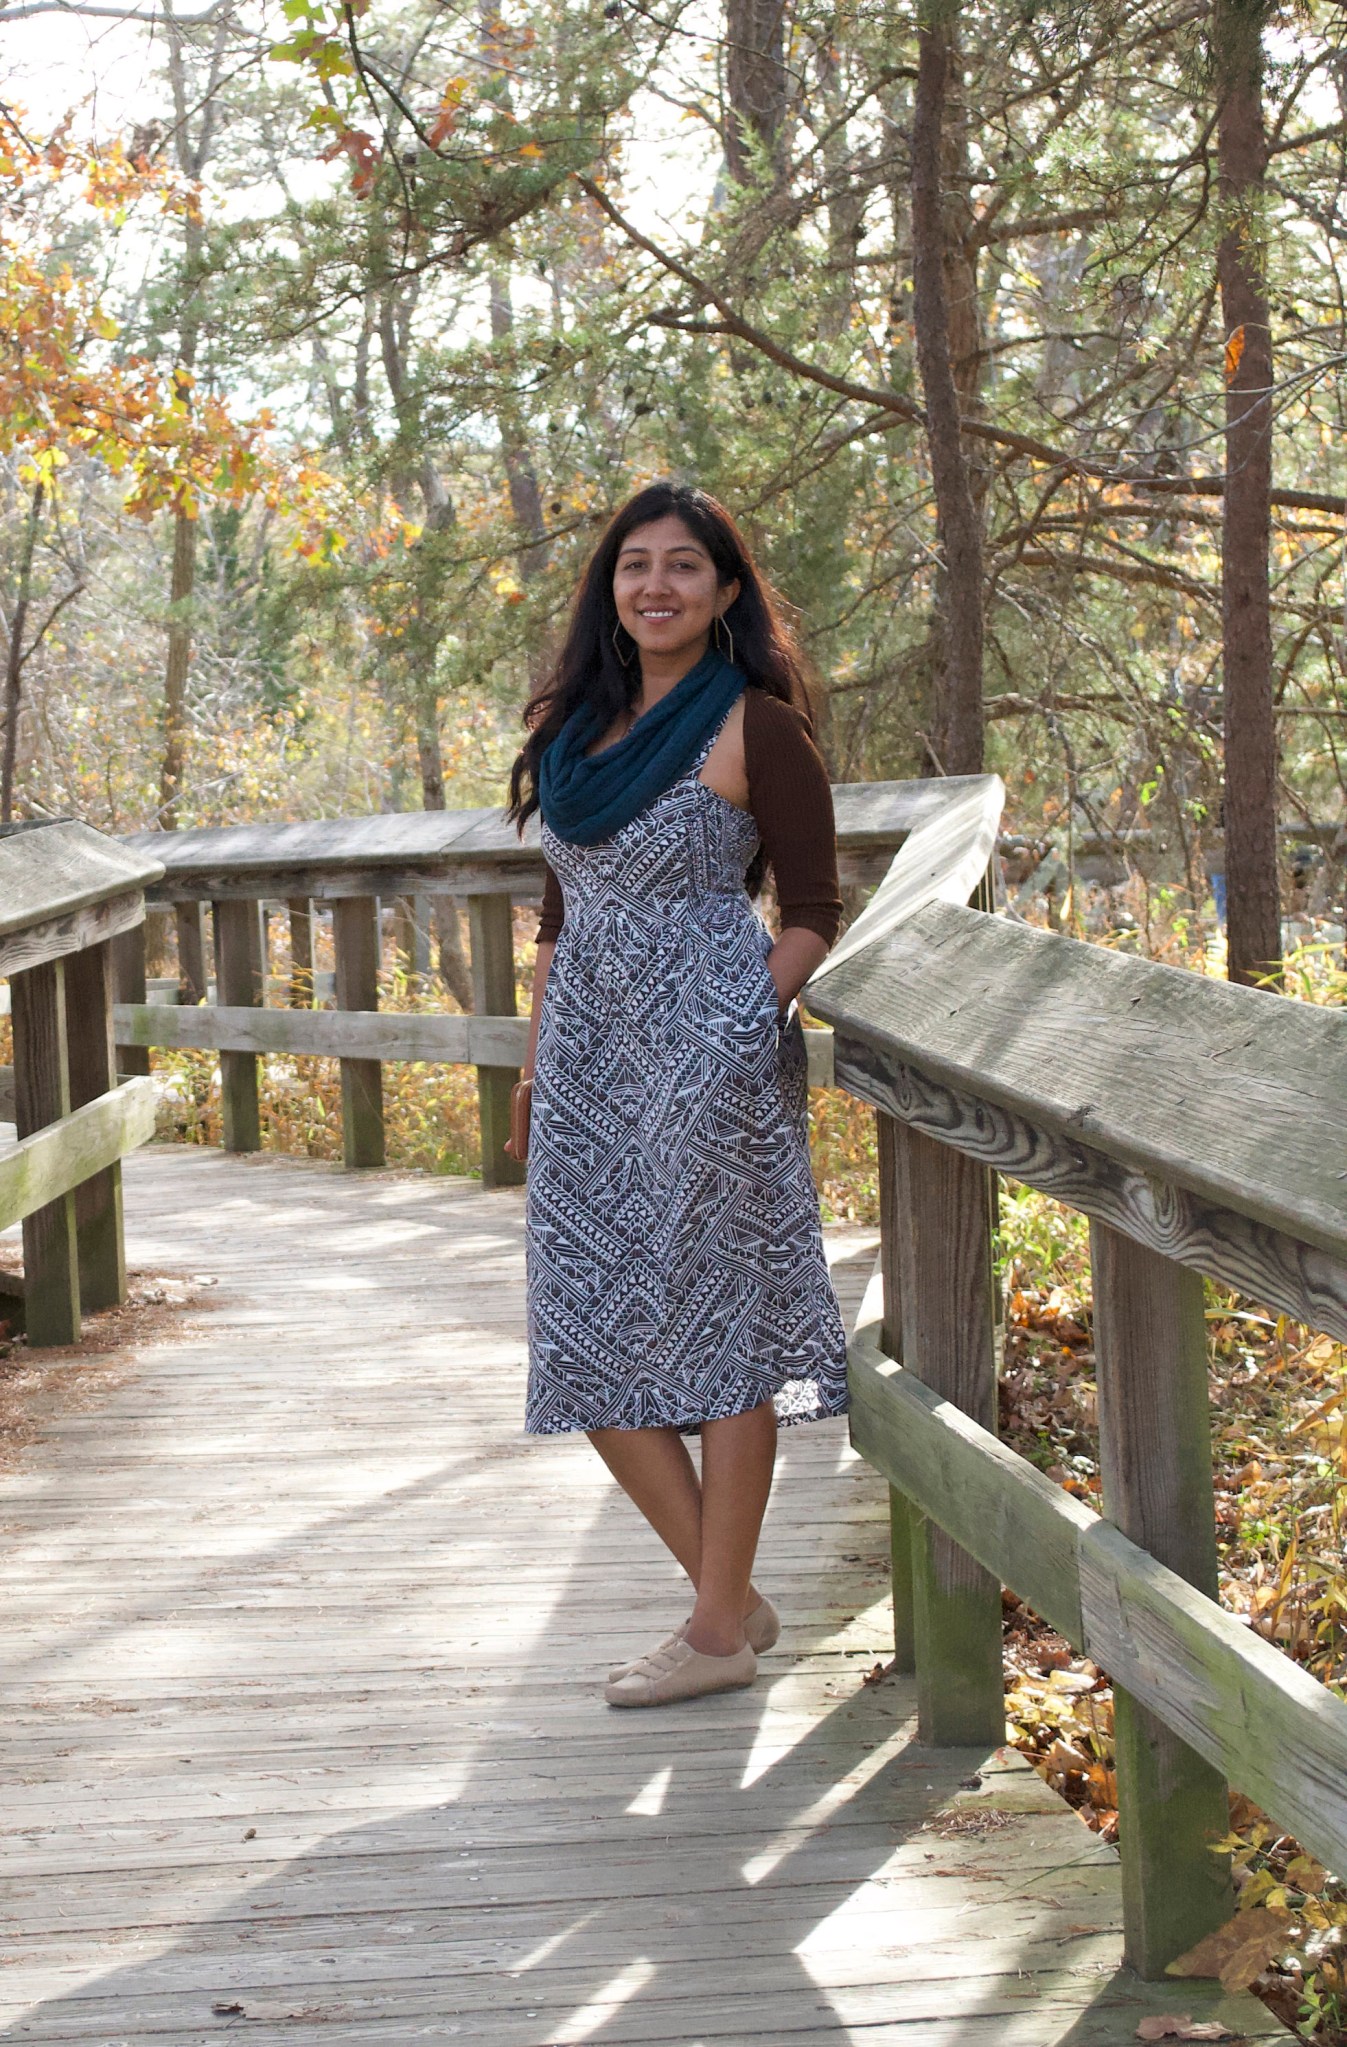 Woman with tan skin and long dark brown hair wears a black and white dress with a brown sweater and a teal scarf. She is smiling and standing on a wooden walkway with trees surrounding her. 